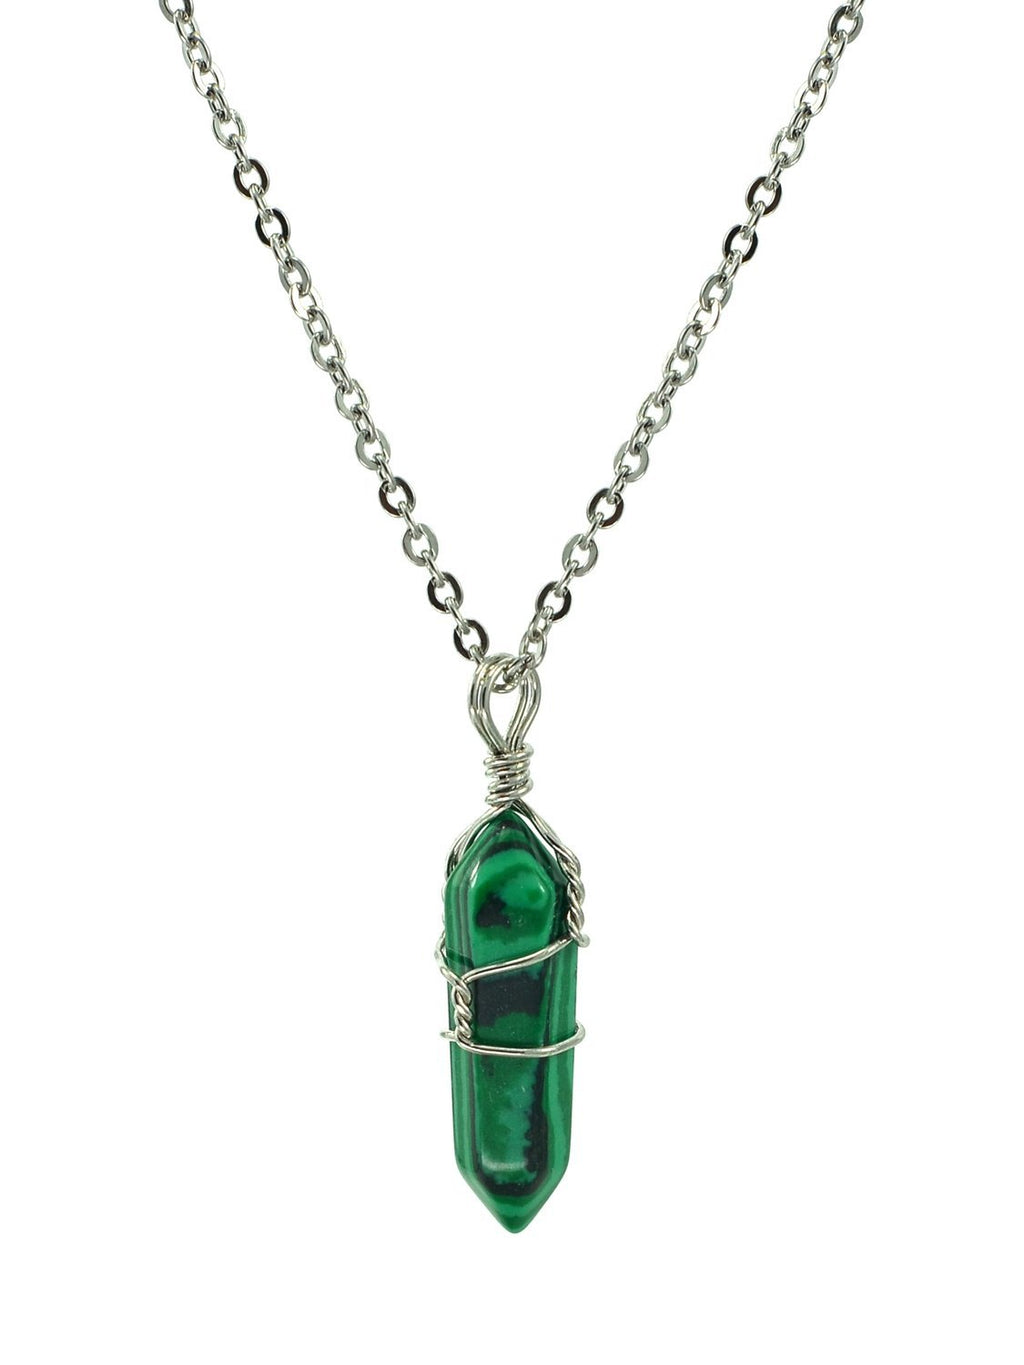 [Australia] - Paialco Jewelry Hand Wired Natural Crystal Healing Point Chakra Pendant Necklace 18" Created Malachite 